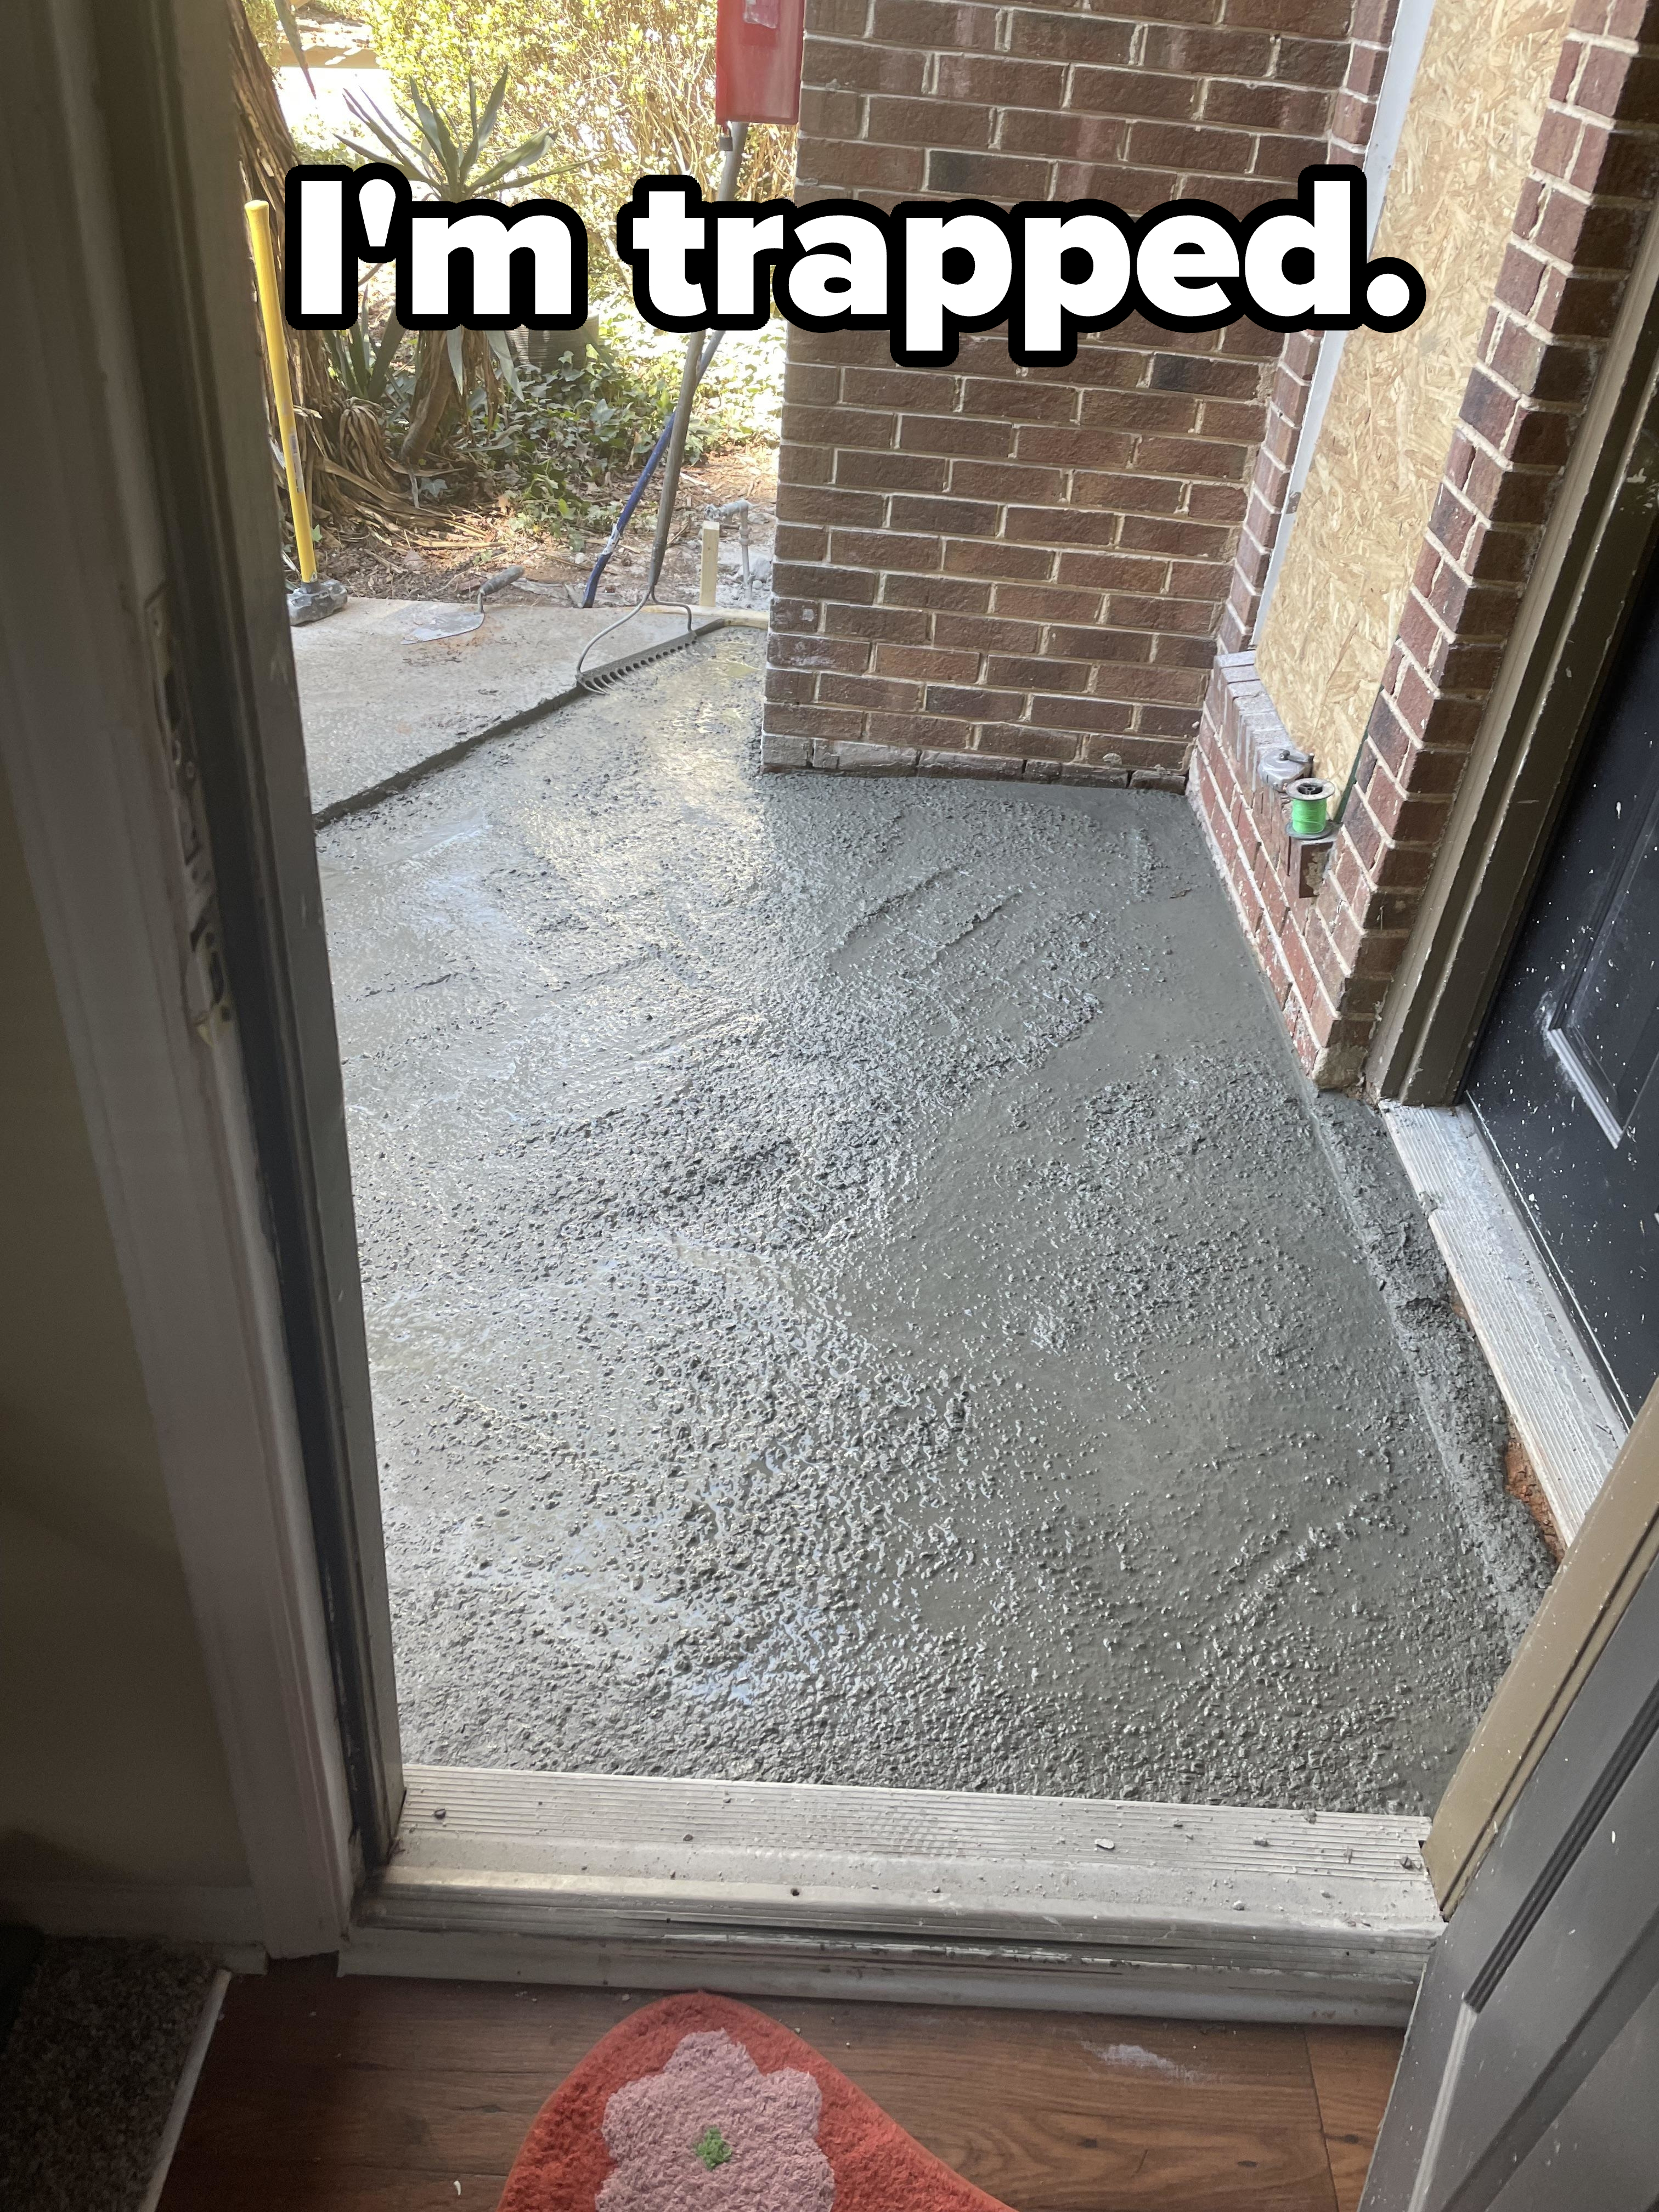 Freshly poured concrete on a residential doorway step